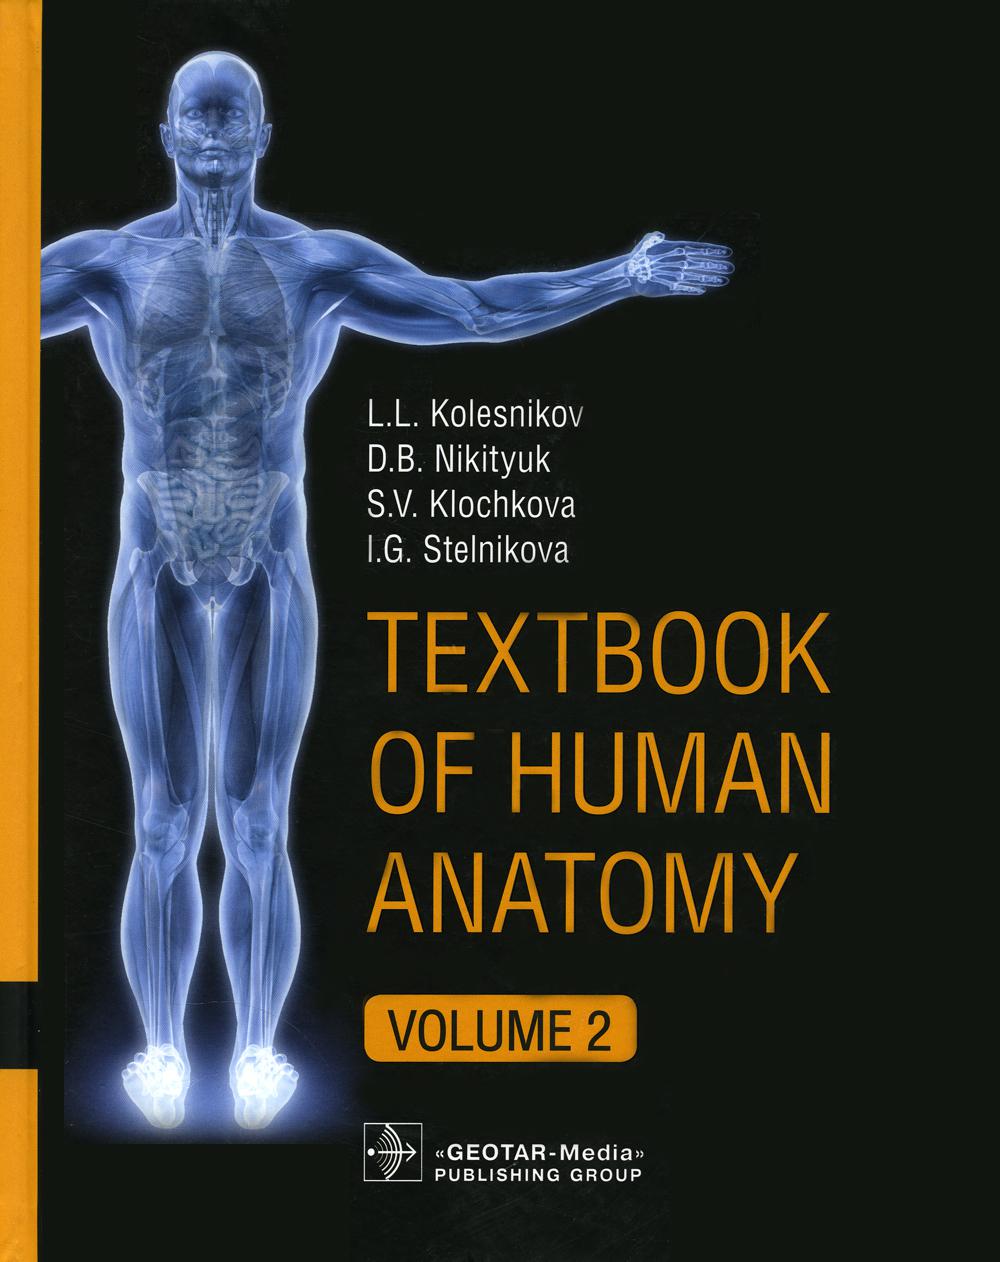 Textbook of Human Anatomy. In 3 vol. Vol. 2: Splanchnology and cardiovascular system:  .